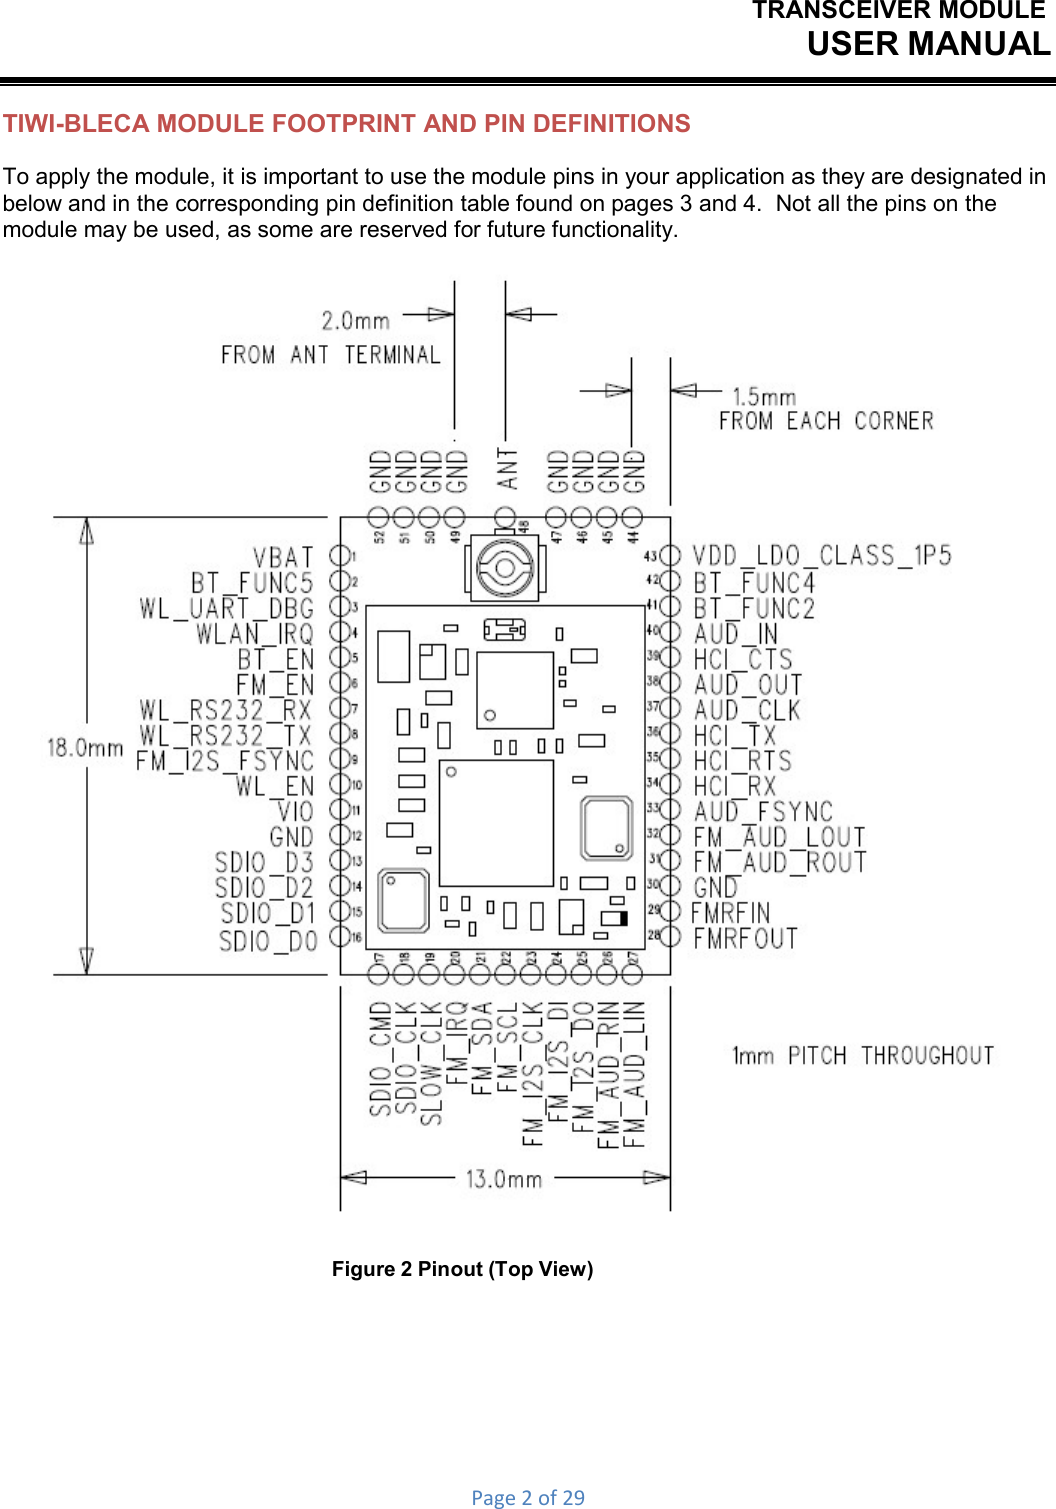 TRANSCEIVER MODULEUSER MANUALPage2of29 TIWI-BLECA MODULE FOOTPRINT AND PIN DEFINITIONS To apply the module, it is important to use the module pins in your application as they are designated in below and in the corresponding pin definition table found on pages 3 and 4.  Not all the pins on the module may be used, as some are reserved for future functionality.  Figure 2 Pinout (Top View) 